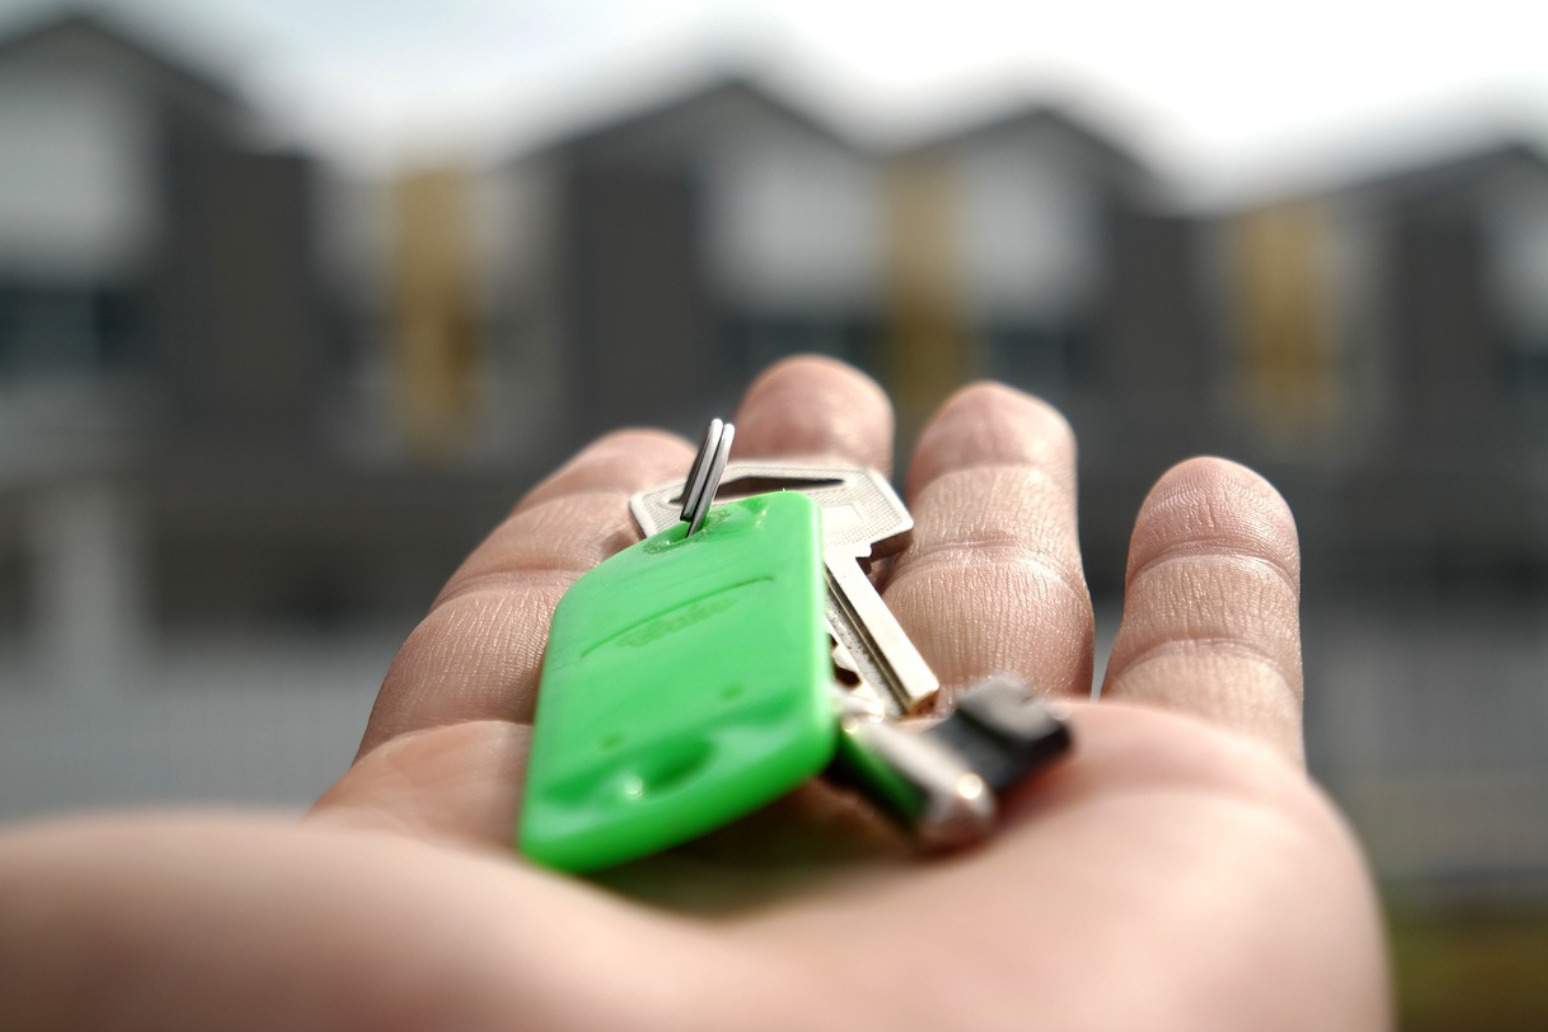 £82 billion of property transactions are now on hold due to lockdown measures 